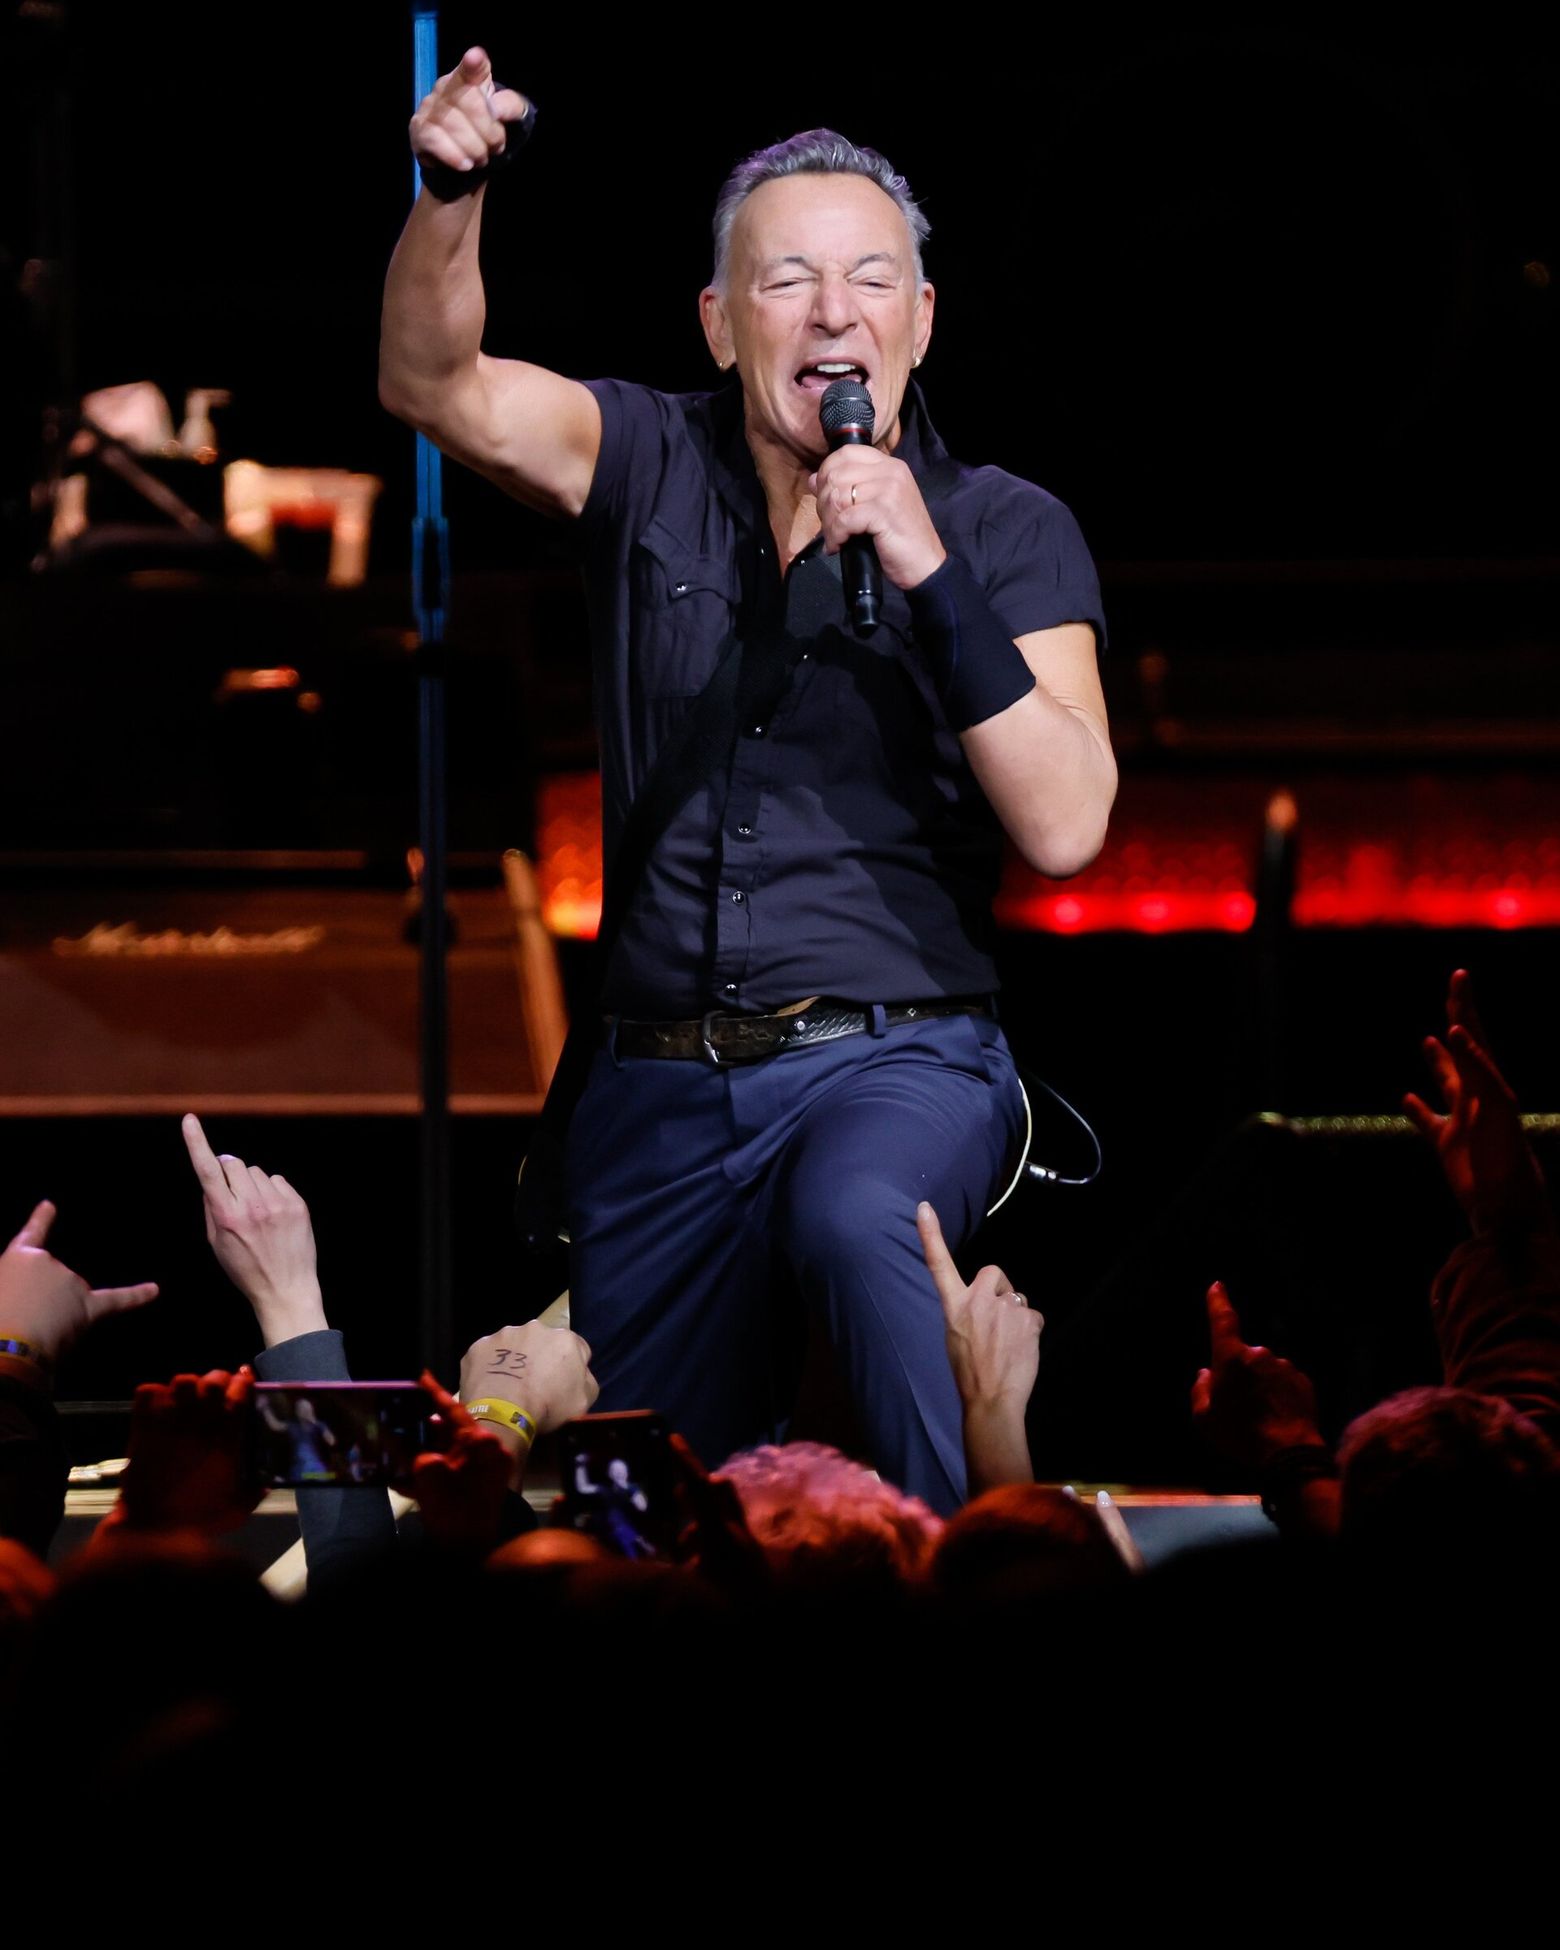 Getting Into… Bruce Springsteen